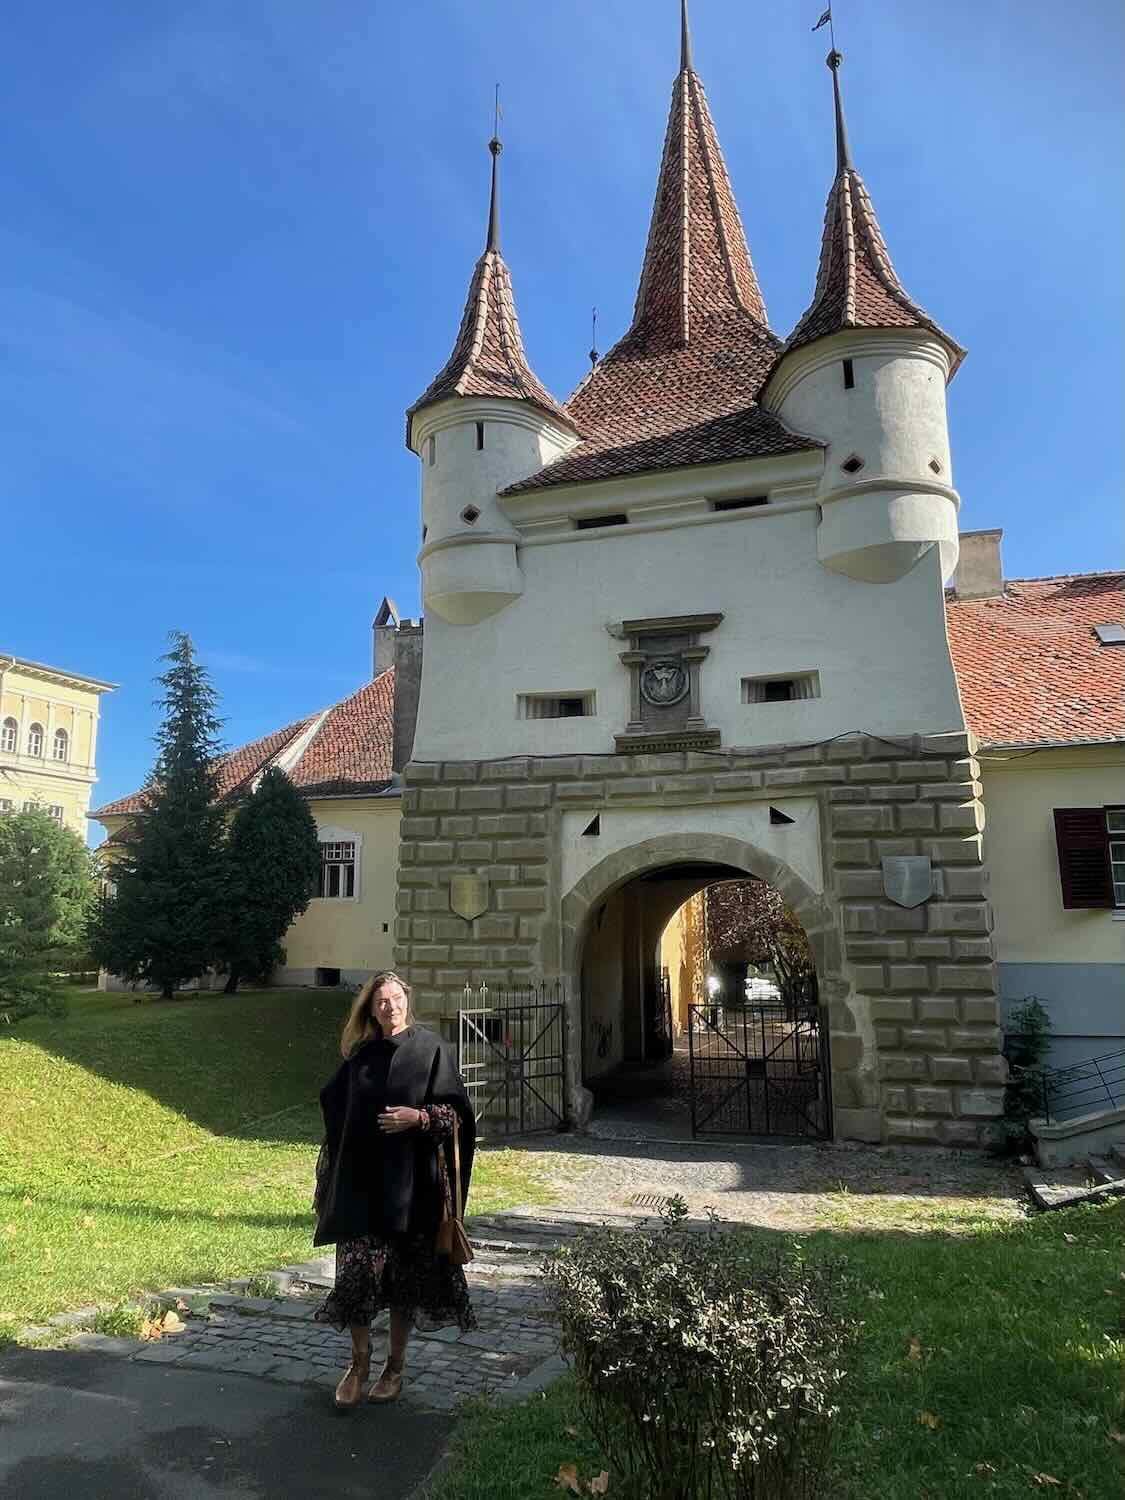 The woman walks away from a castle gateway, dressed in a cape, suggesting a narrative of exploration and departure amidst historical Romanian architecture.